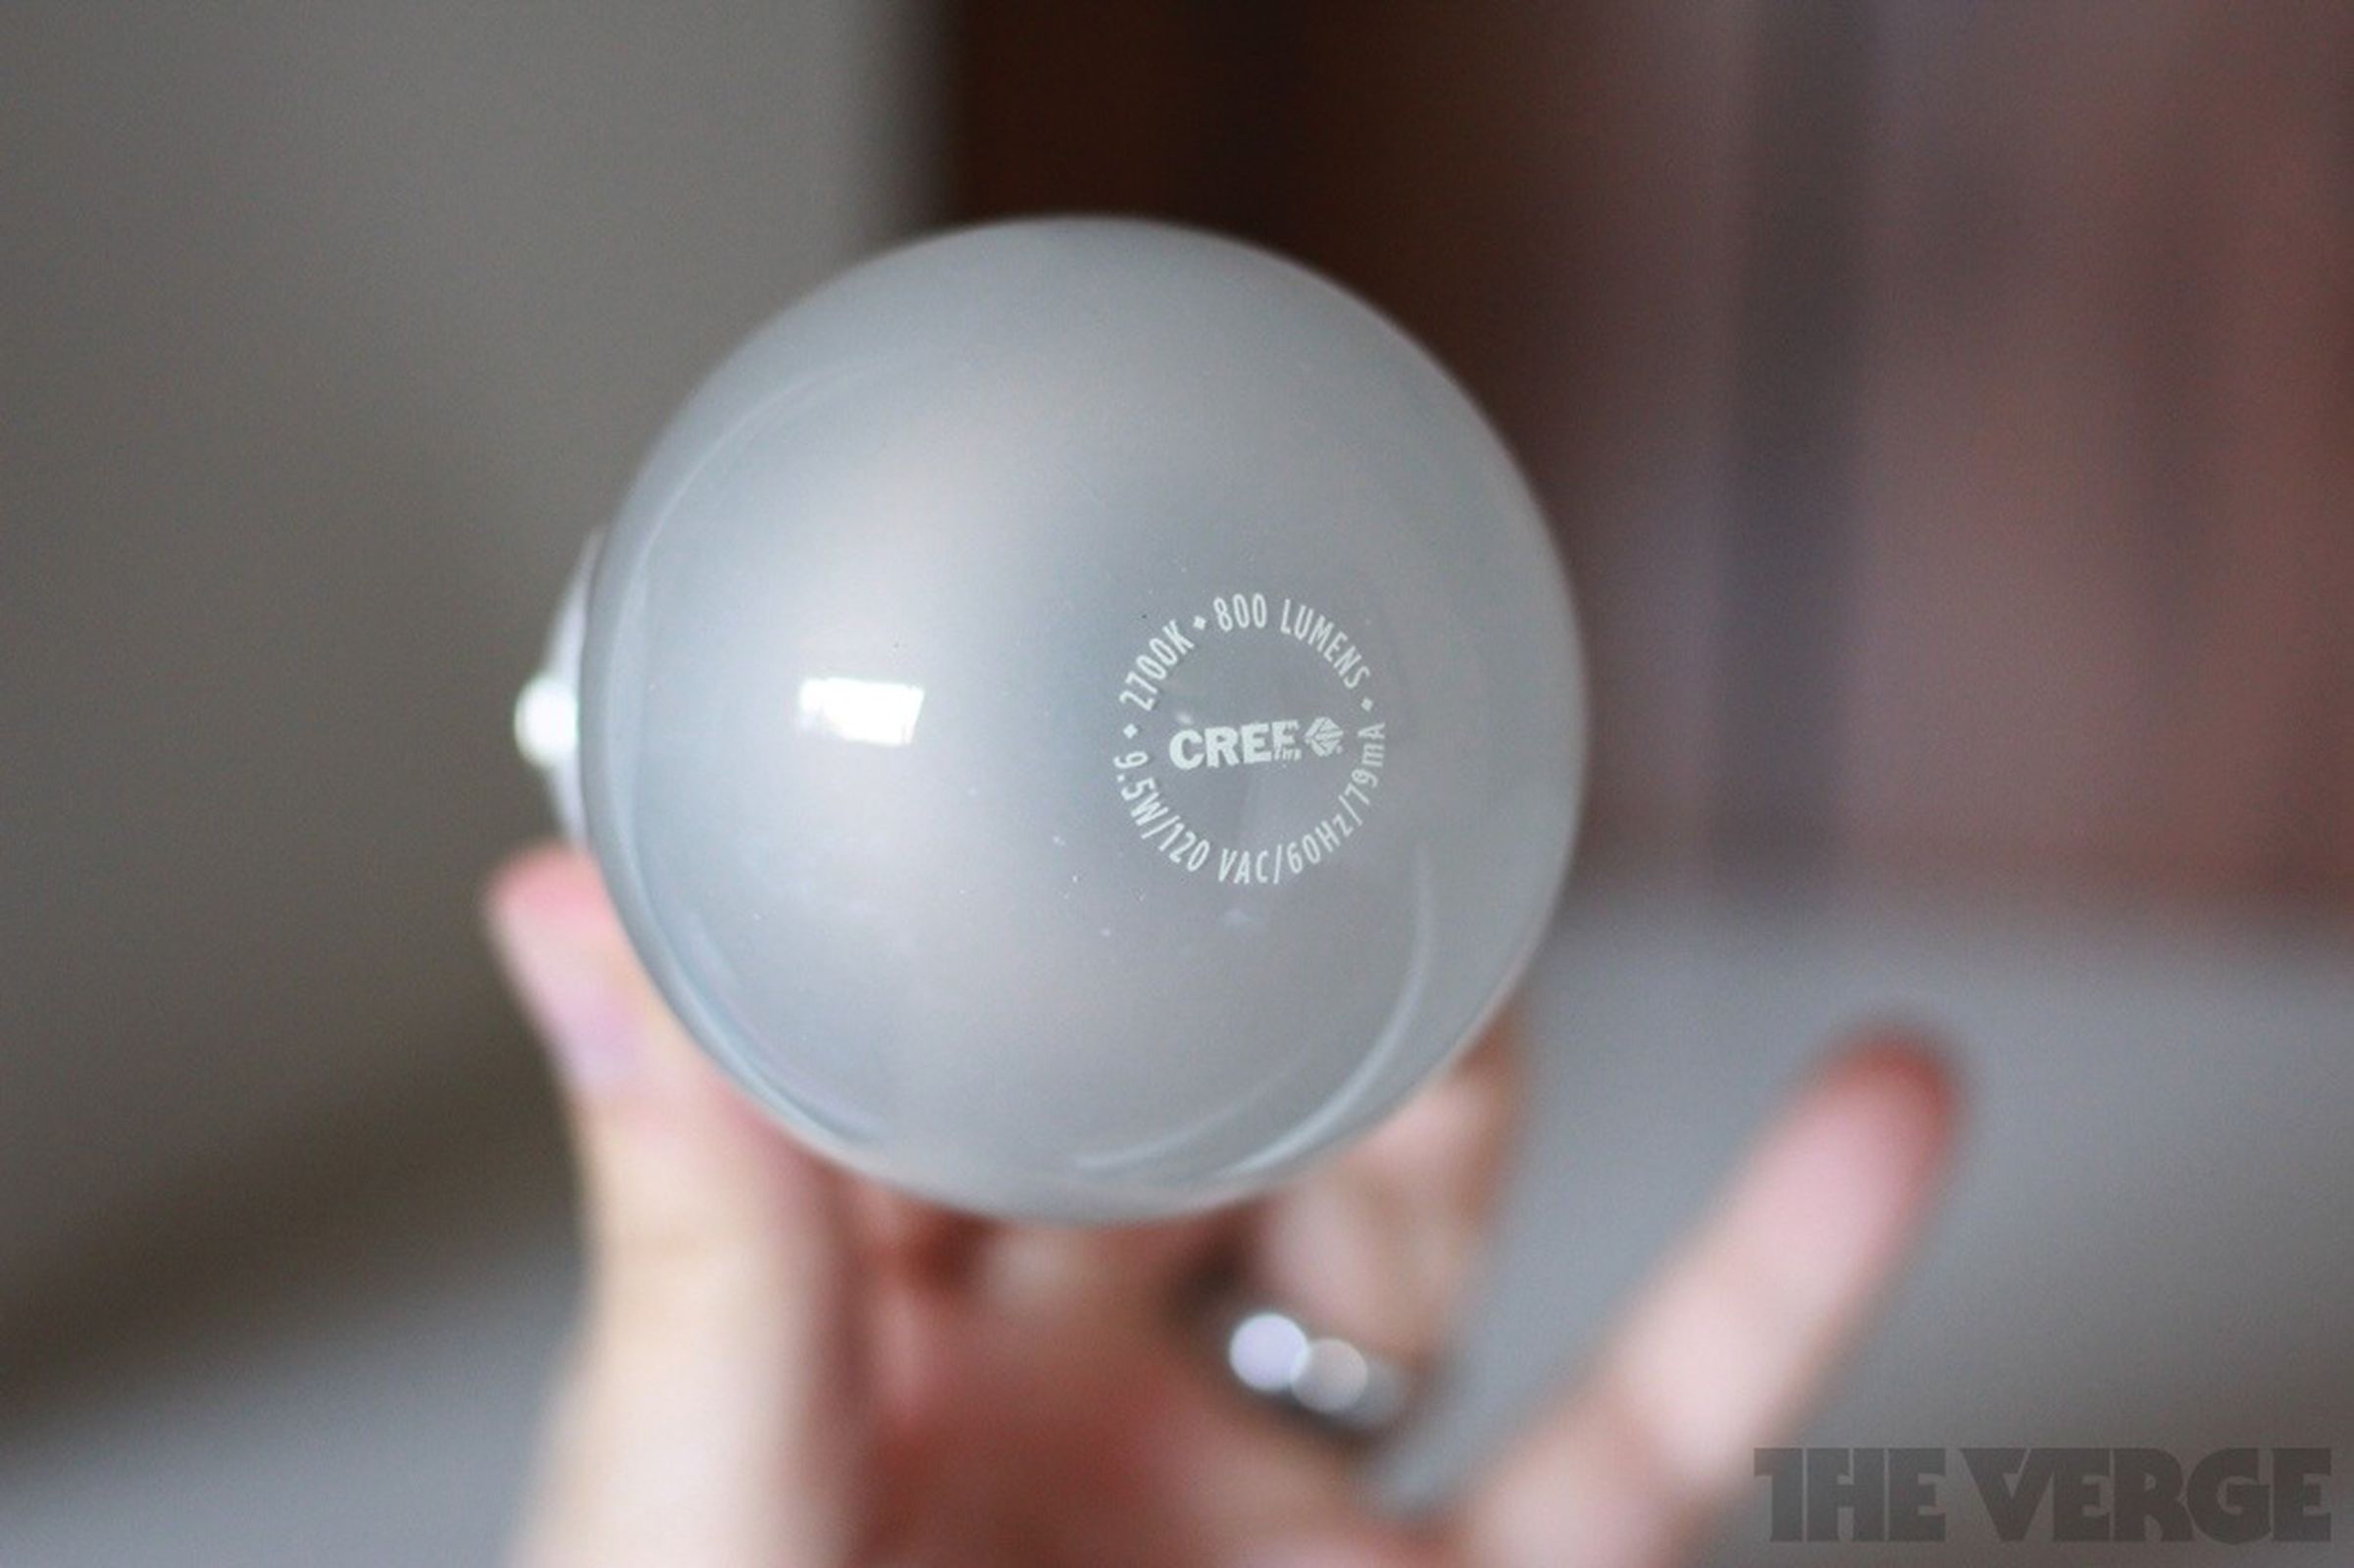 Cree LED light bulb hands-on pictures